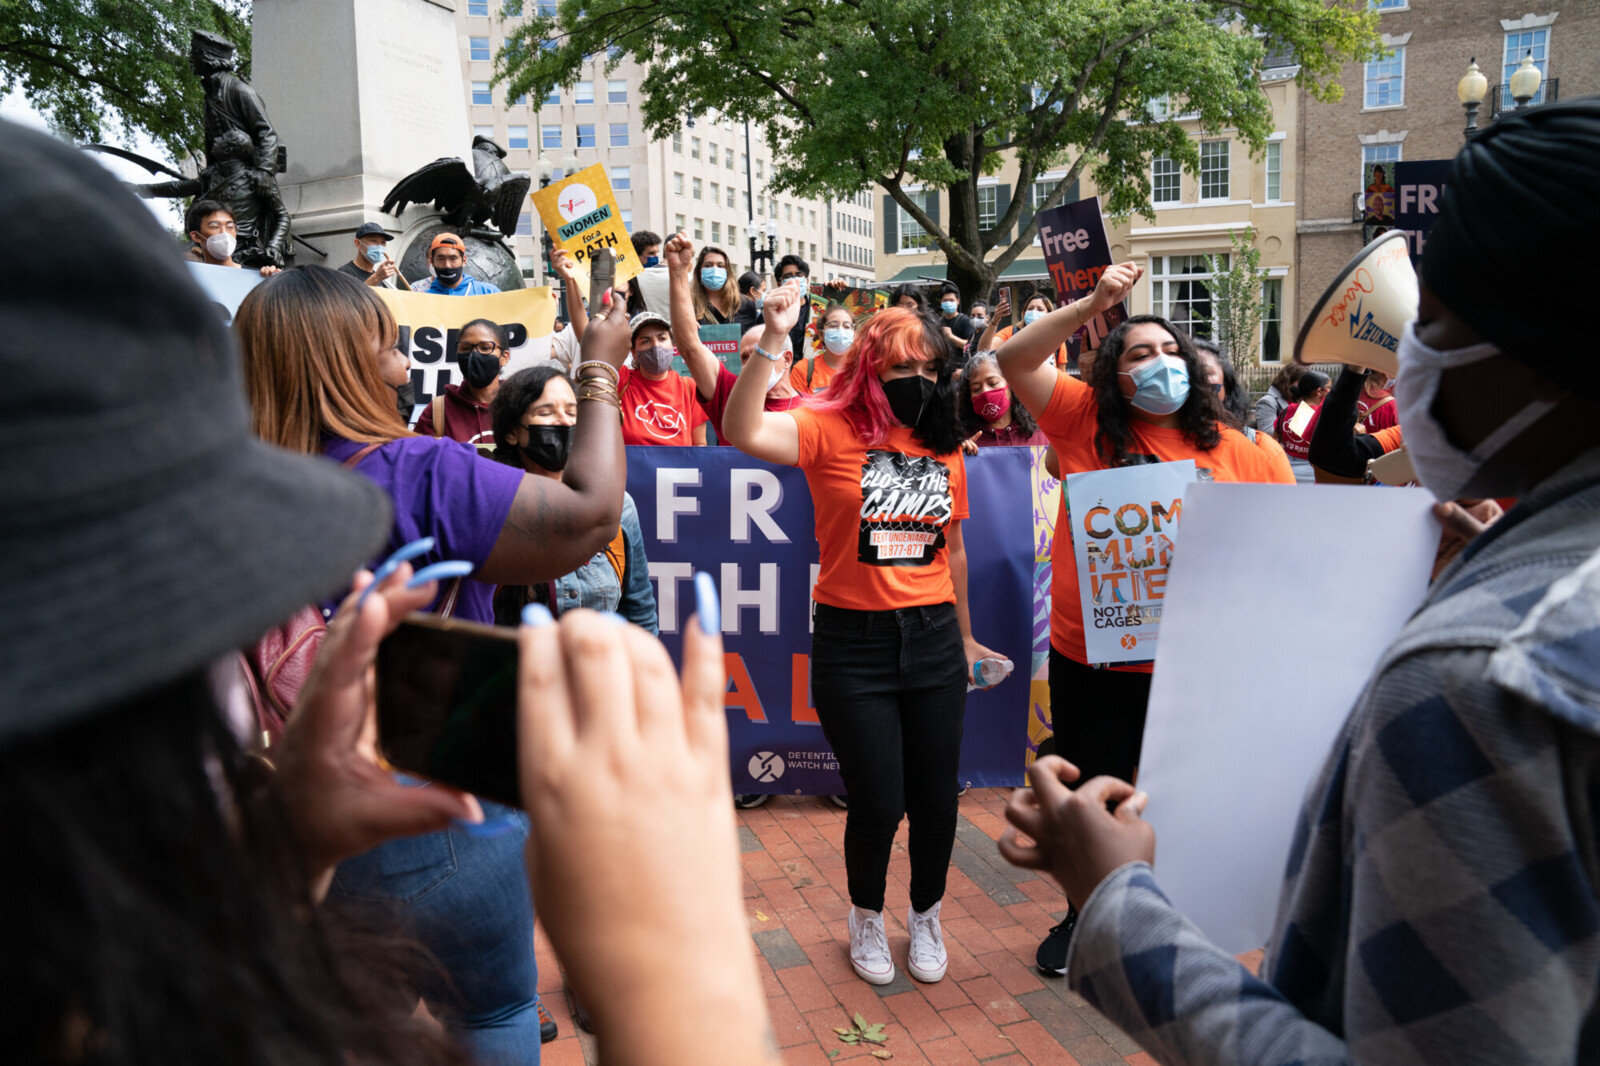 Protestors rally in front of an ICE office